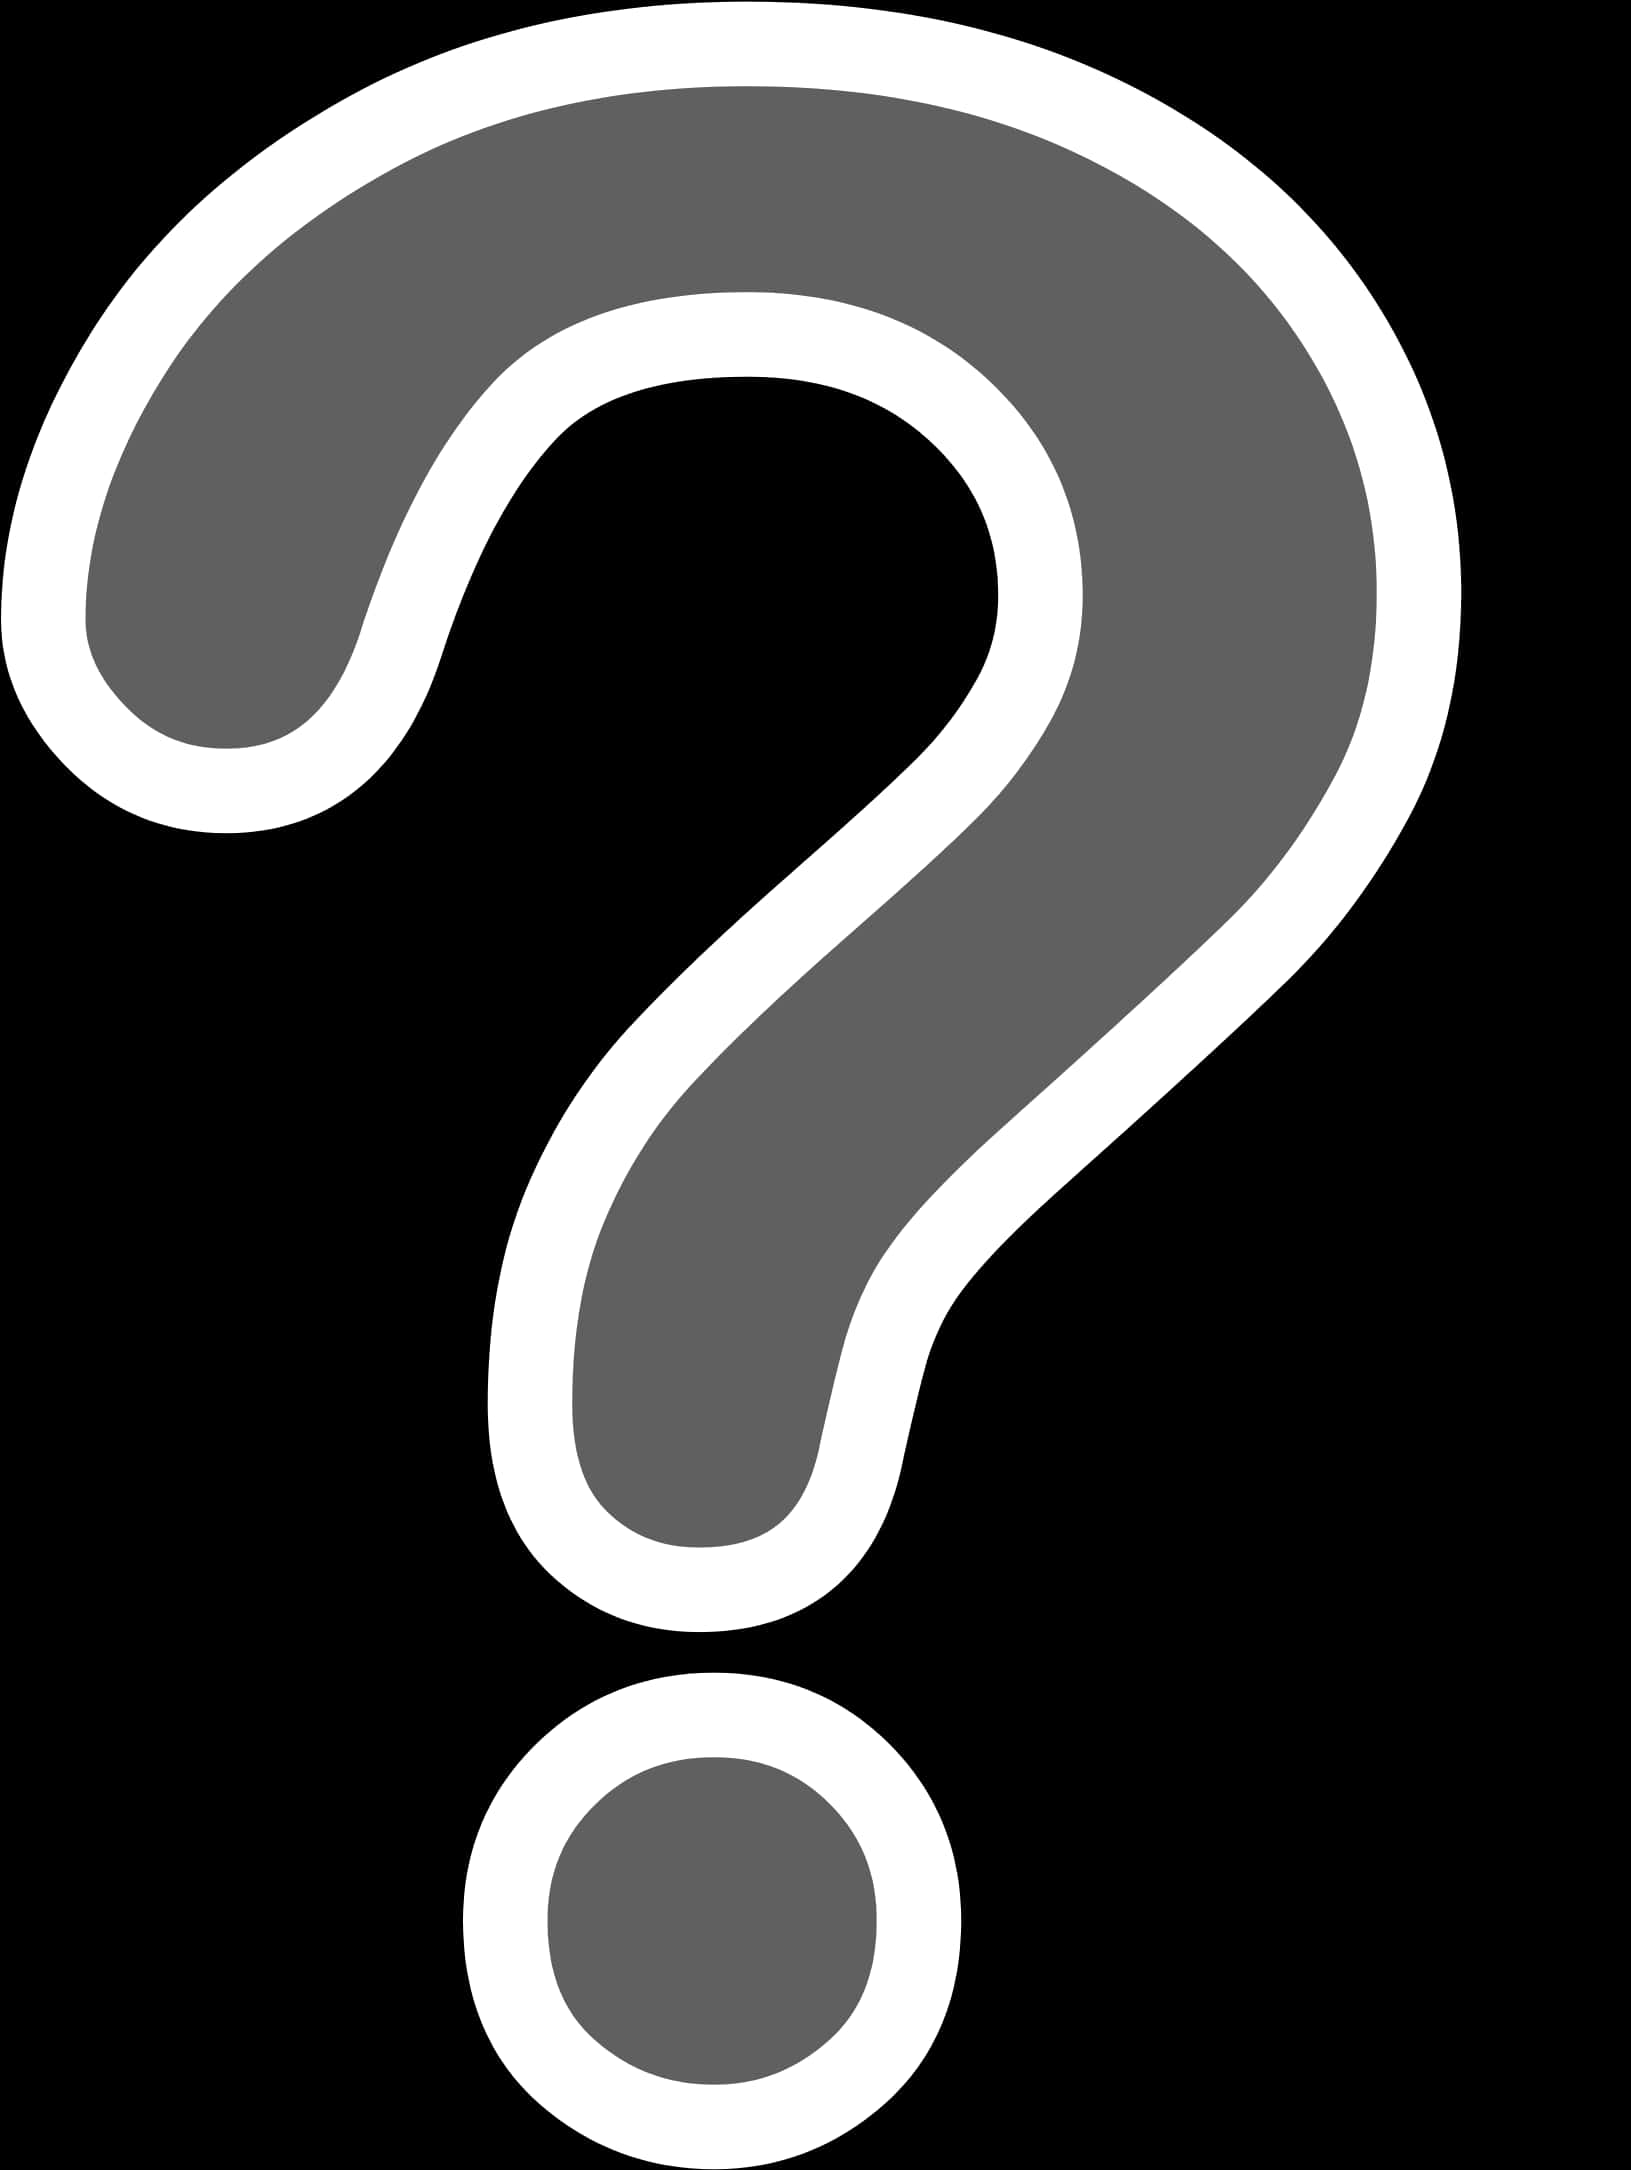 A Question Mark On A Black Background